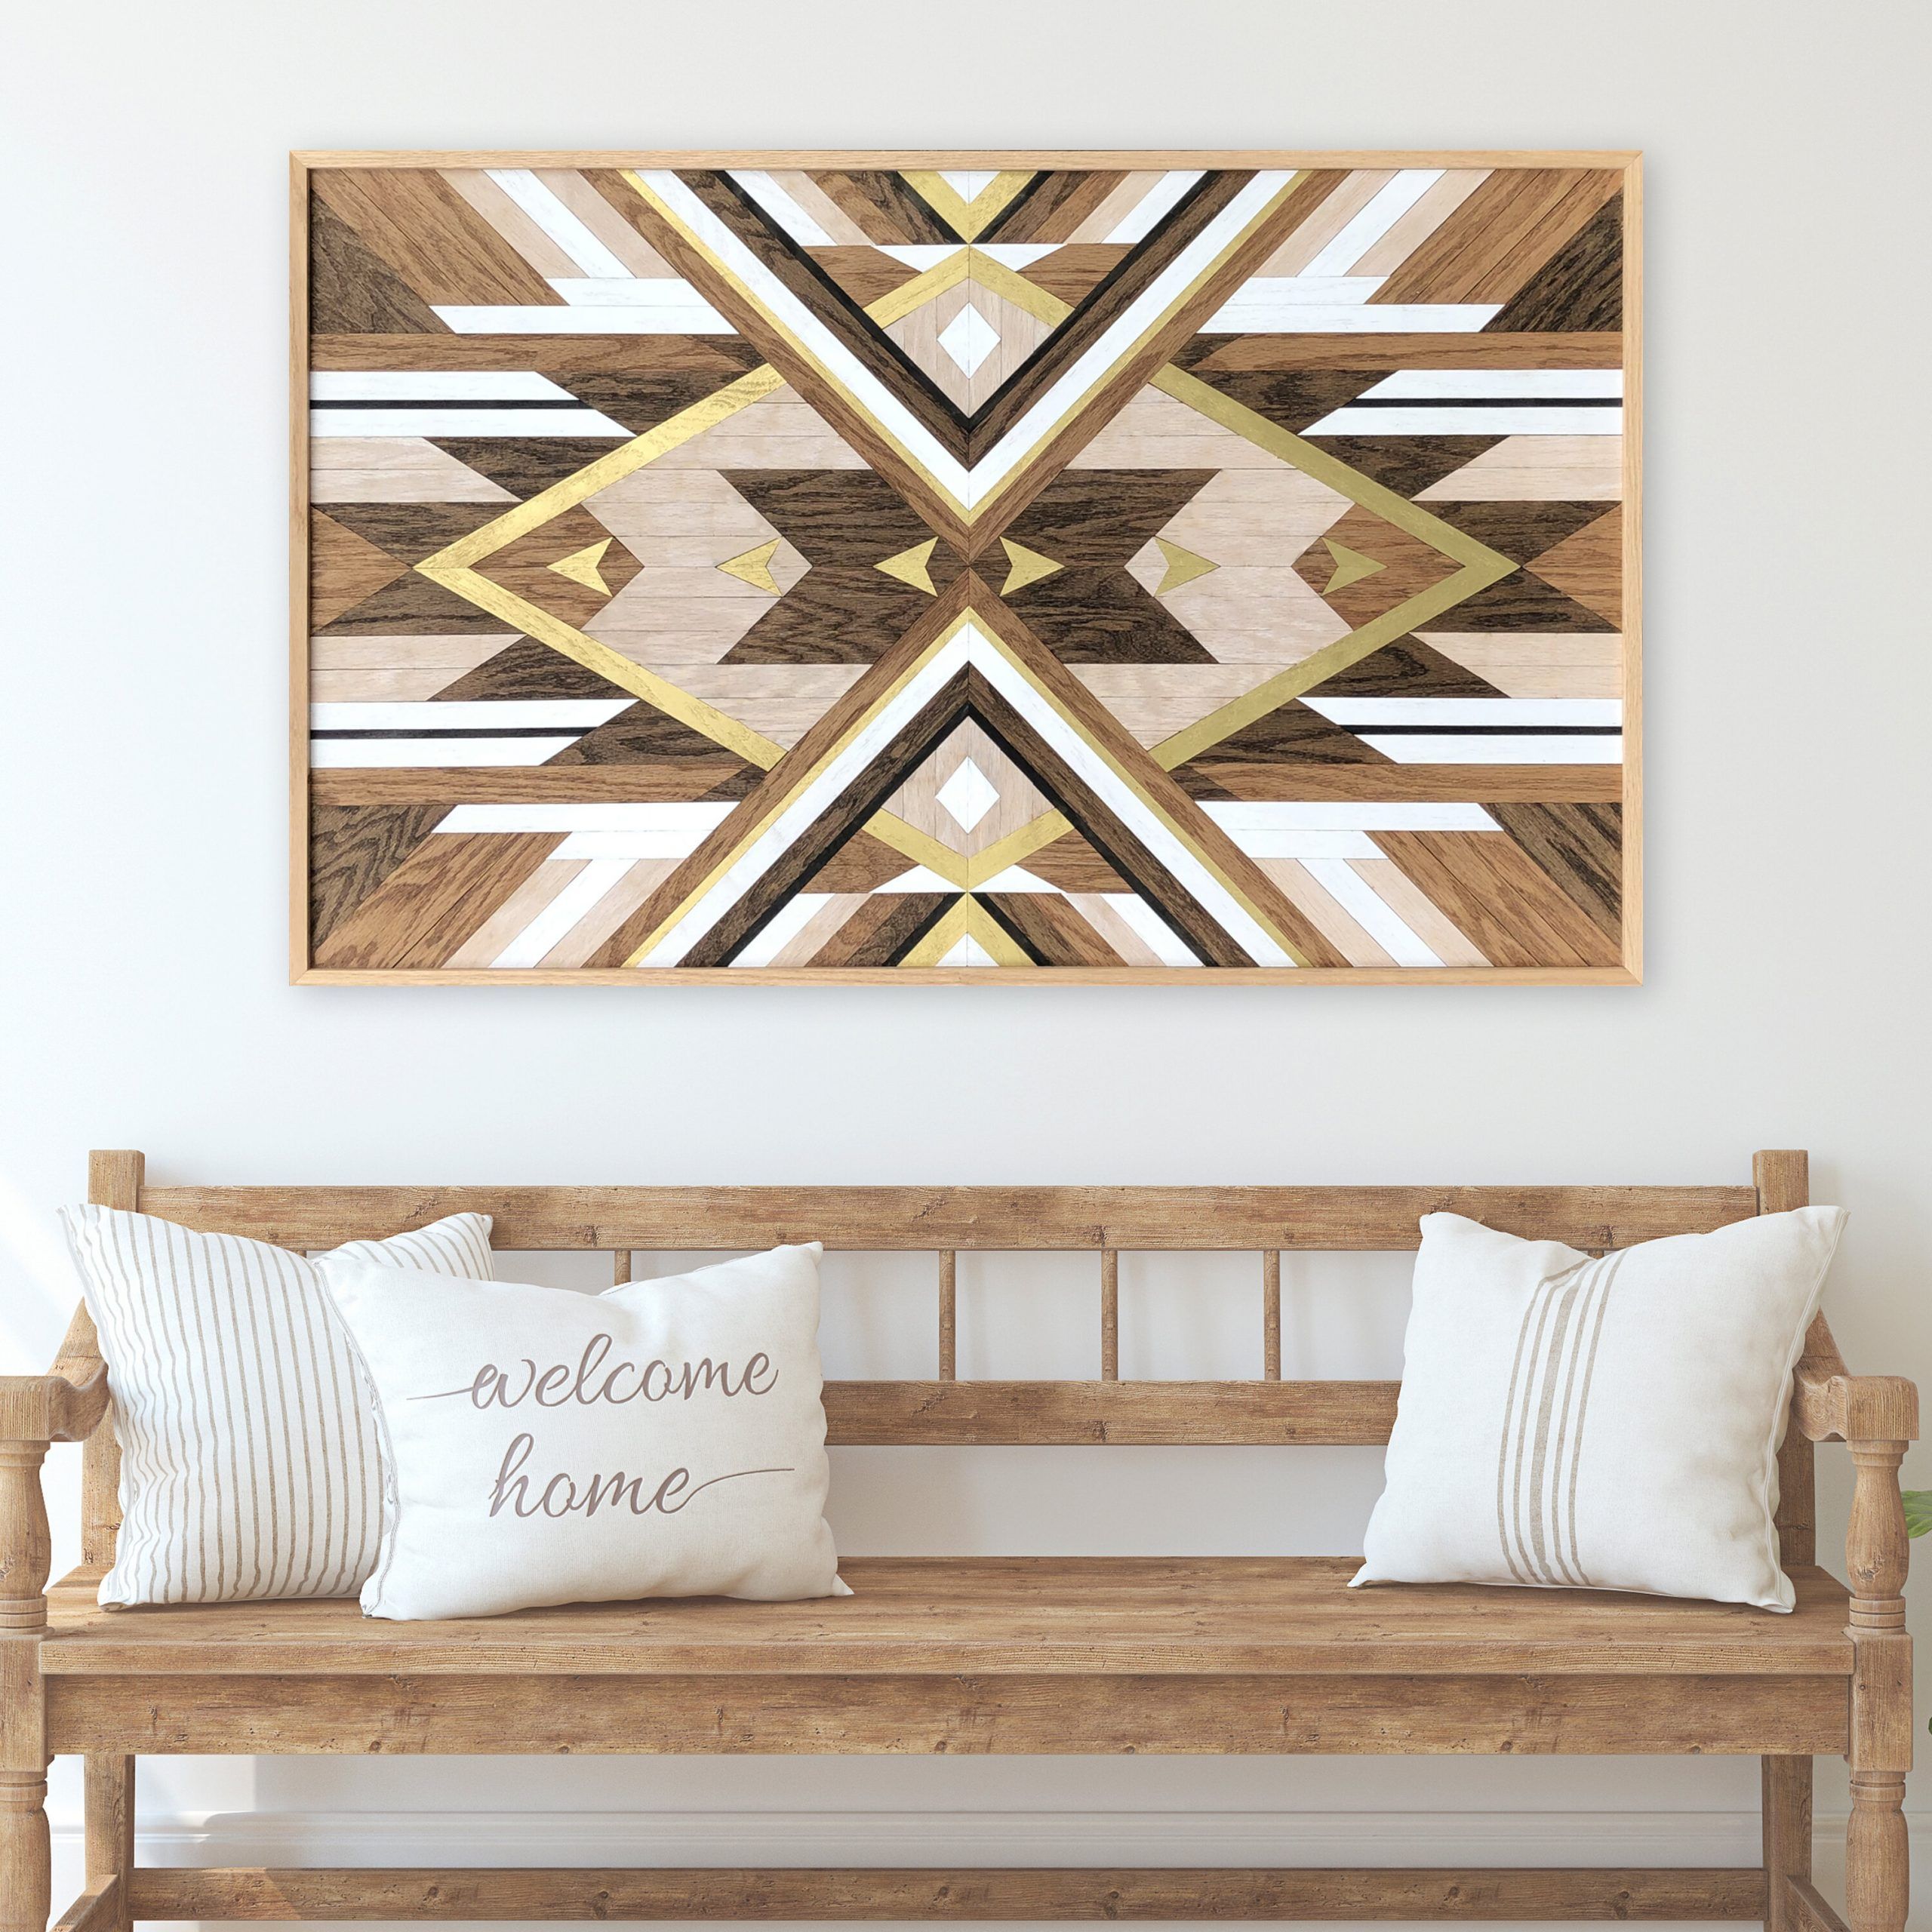 Birch & Buffalo Brixon Geometric Wall Art | Unique Hanging Wooden Decor  With Accents | Handcrafted From Reclaimed Oak Wood | Boho Framed Artwork  For Home & Office Walls | Ready To Inside Oak Wood Wall Art (View 10 of 15)